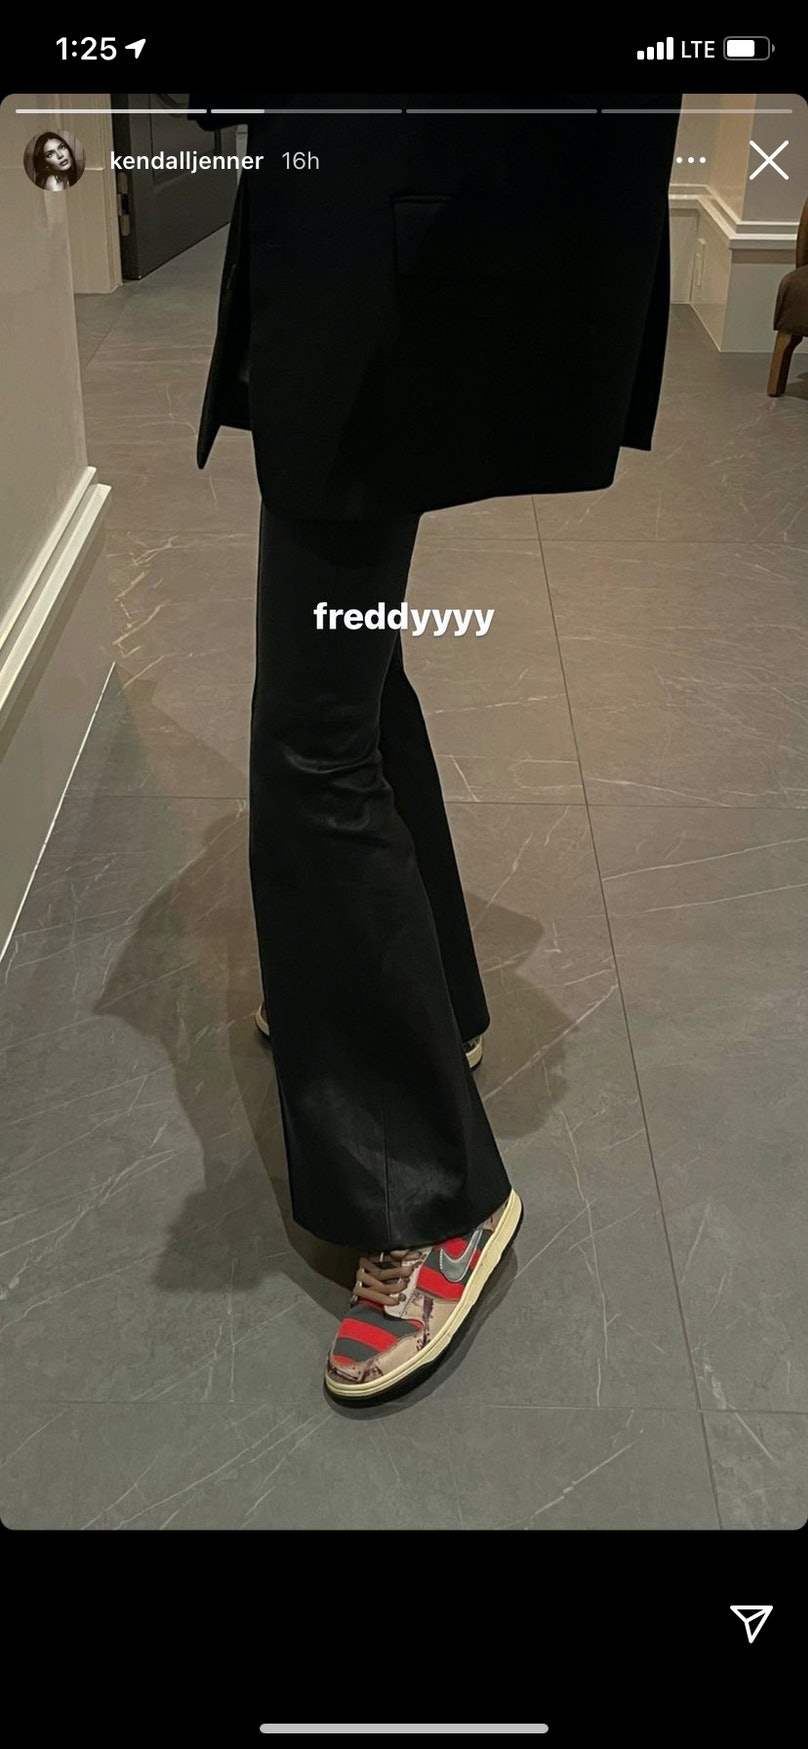 Kendall Jenner And Travis Scott'S Freddy Krueger Sneakers Cost Up To $6.5M  - Grazia Usa